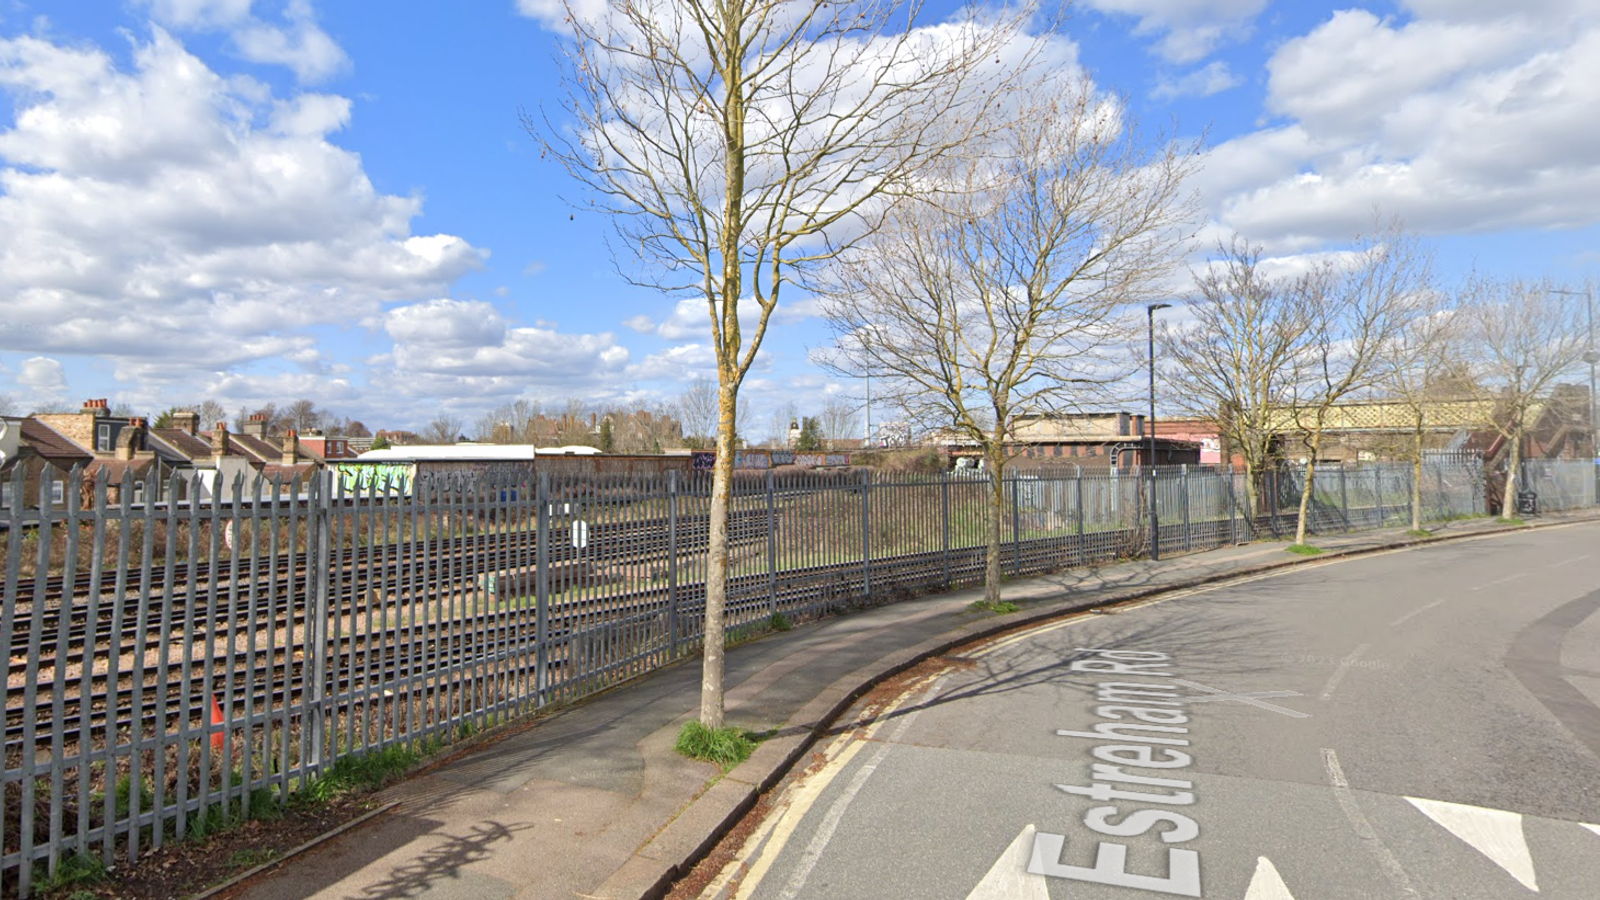 Man found dead on train tracks after car chase with police in Streatham